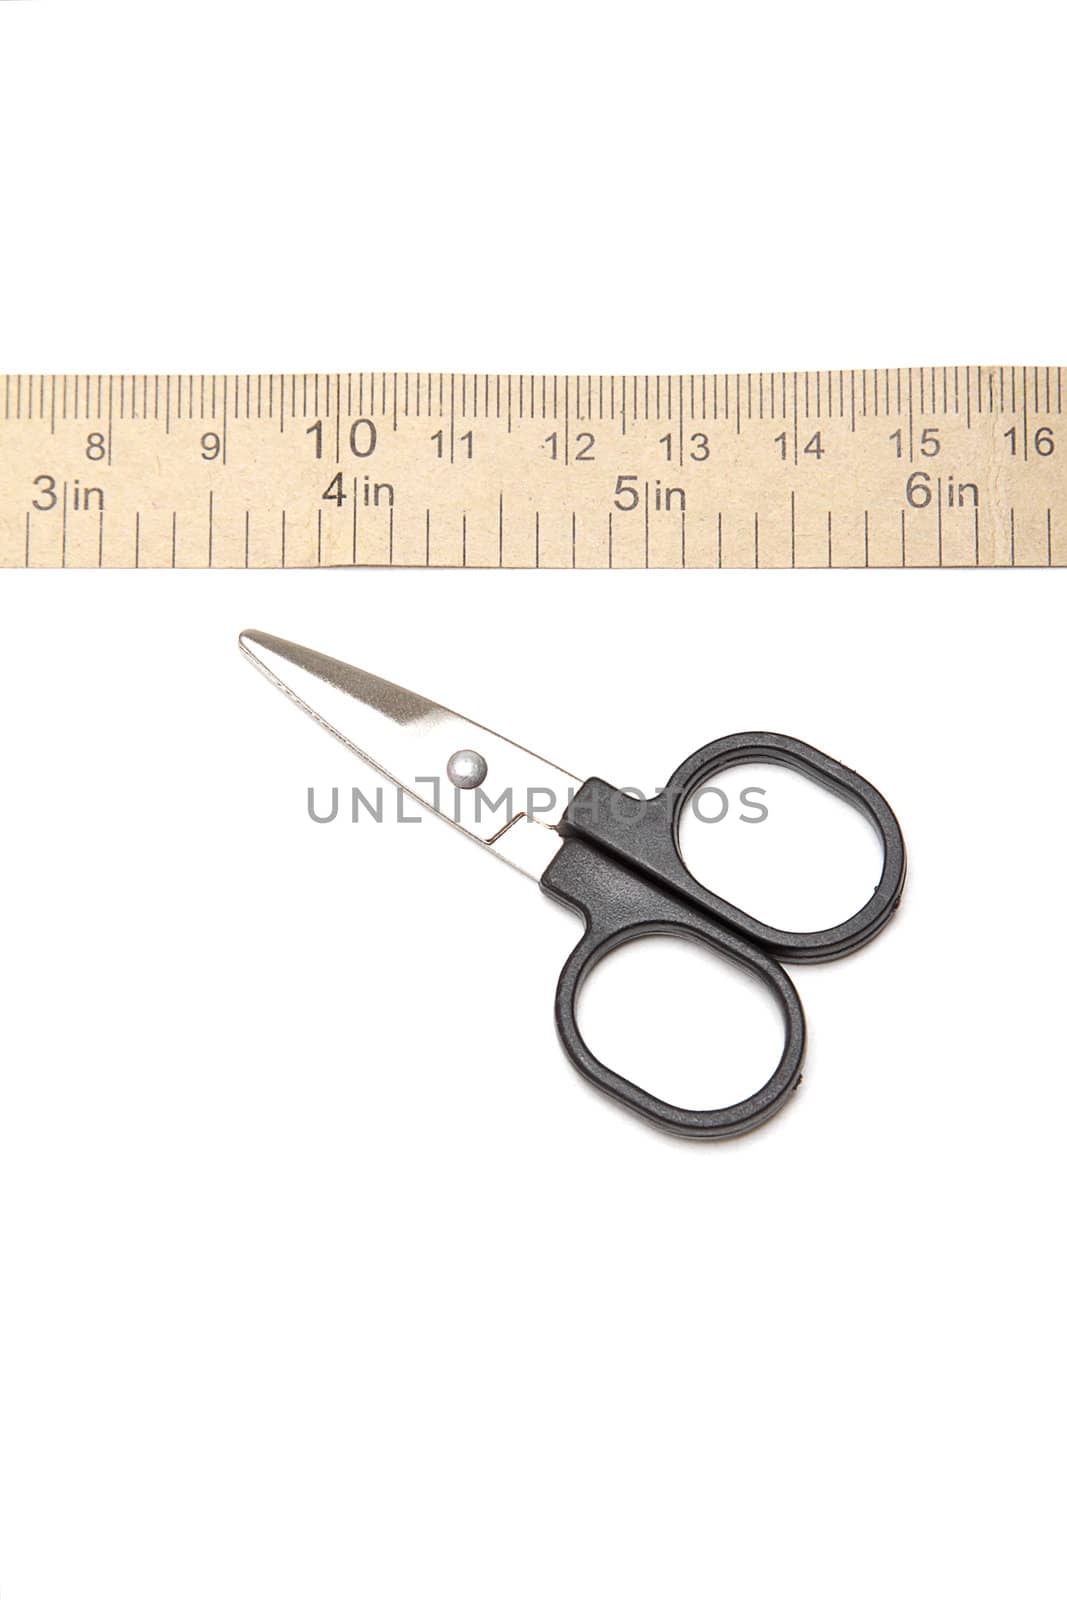 Scissors and measuring tape by pulen